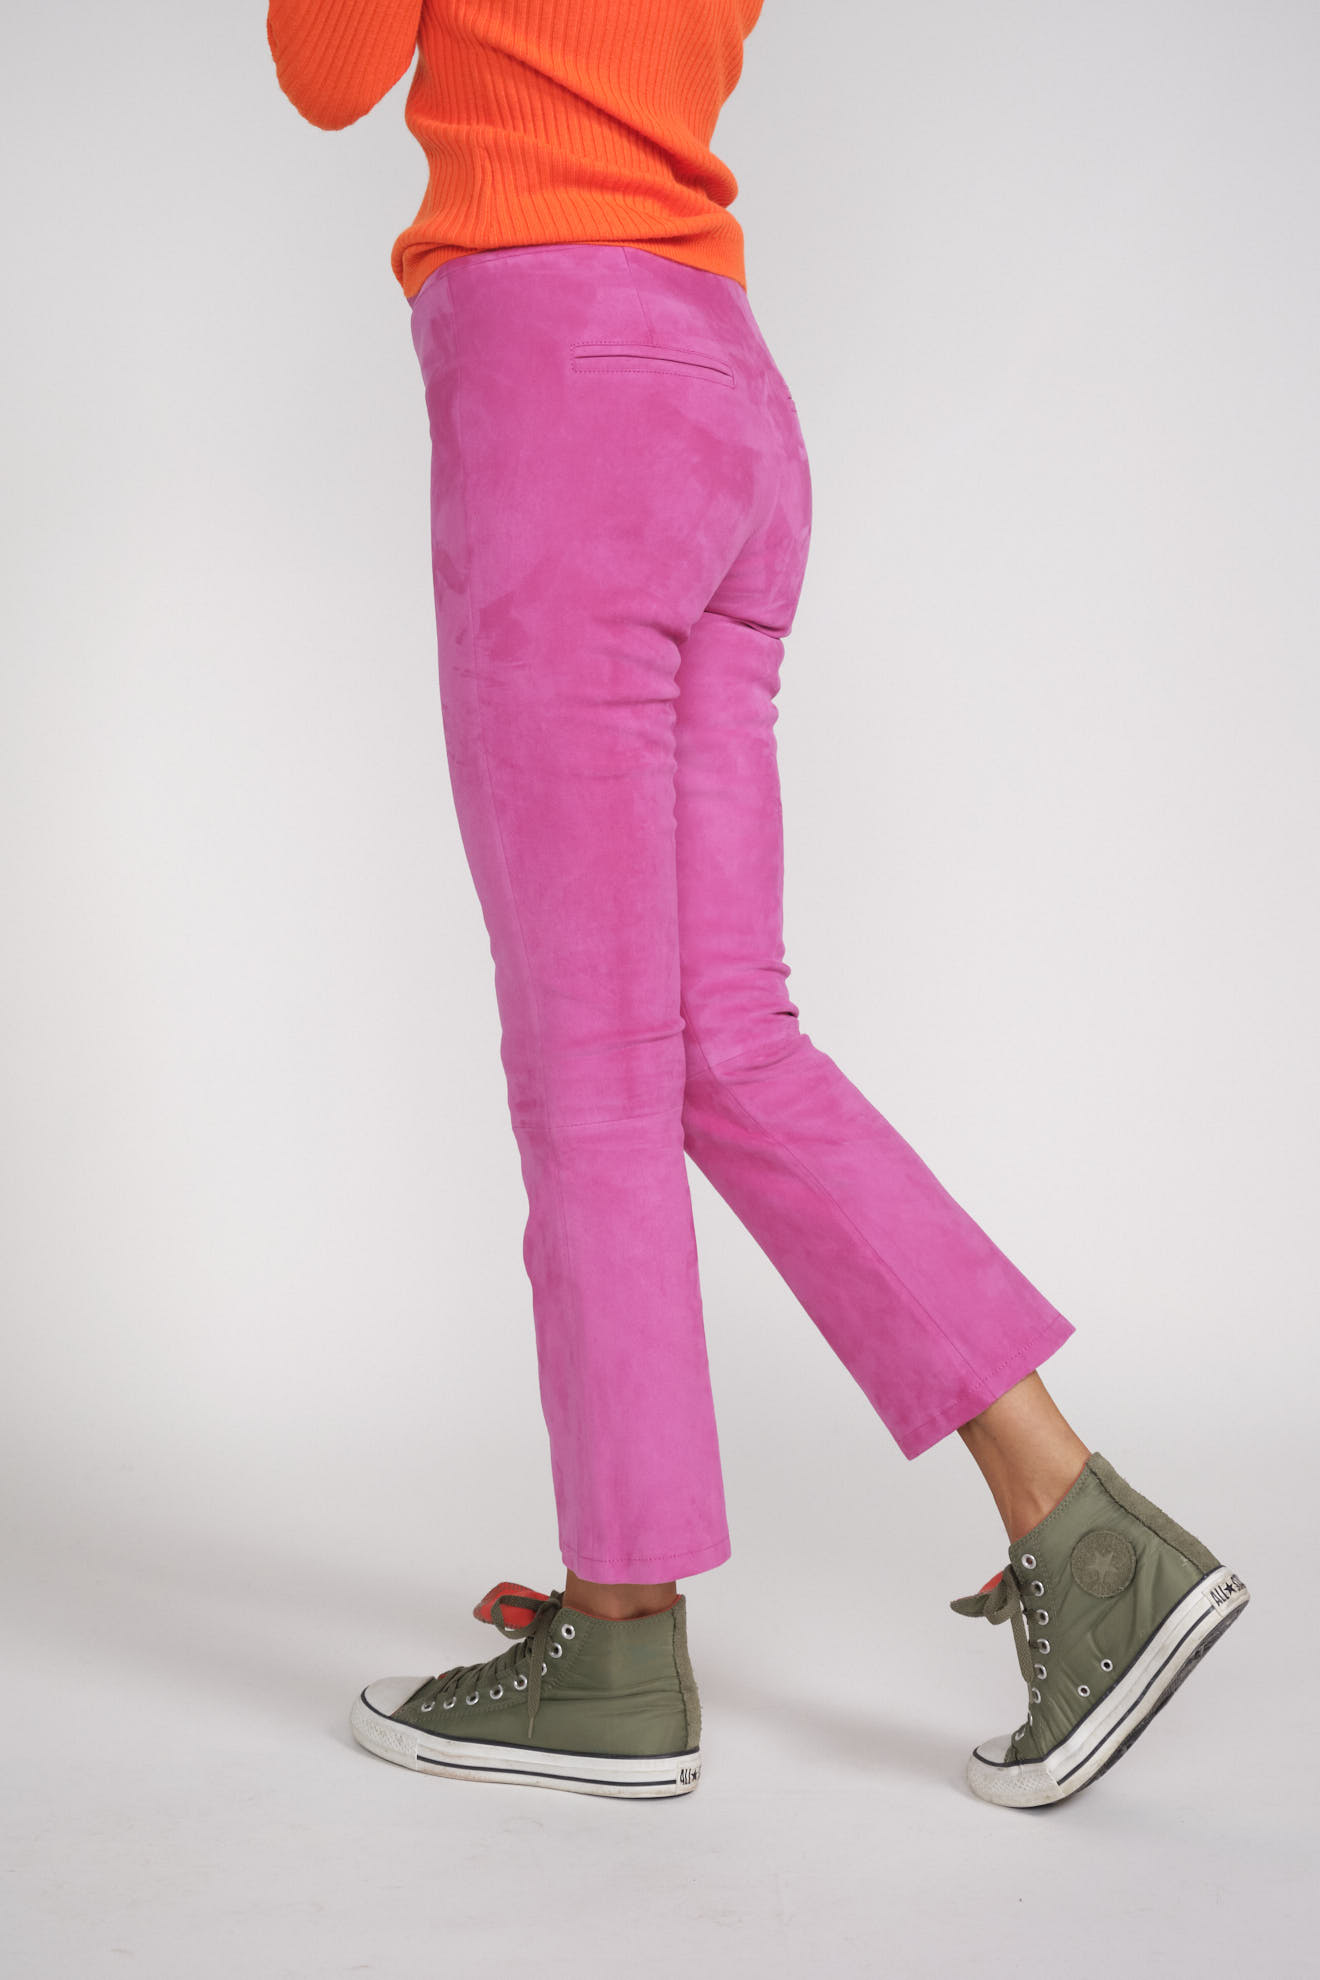 Arma Pants Lively Farbe: taupe Größe: 36 taupe 36